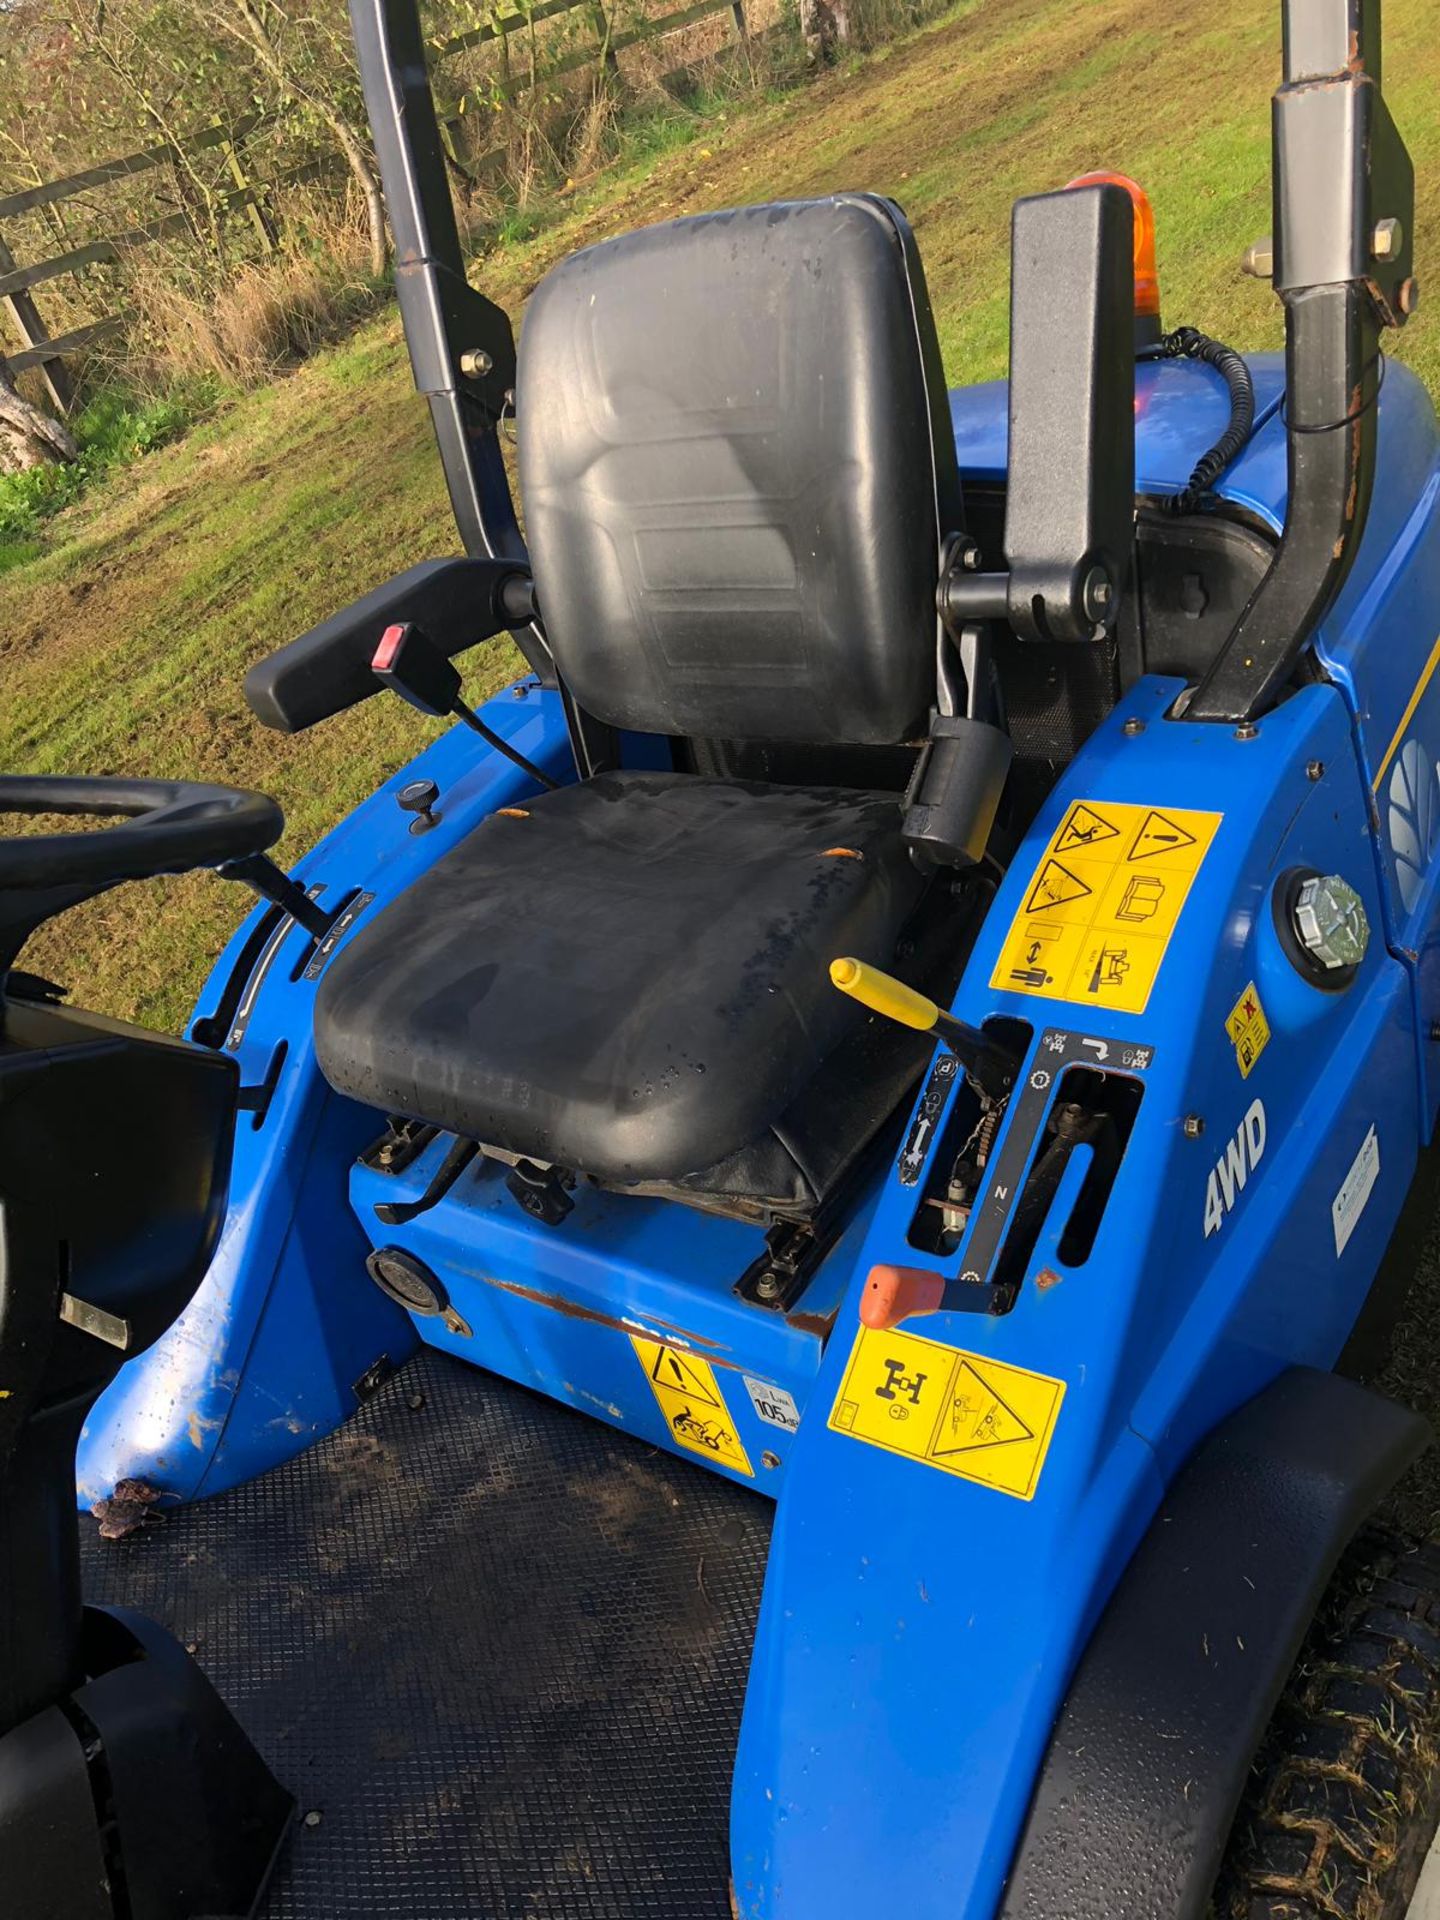 2010/60 REG NEW HOLLAND MC35 4WD RIDE ON LAWN MOWER LOW HOURS *PLUS VAT* - Image 11 of 21